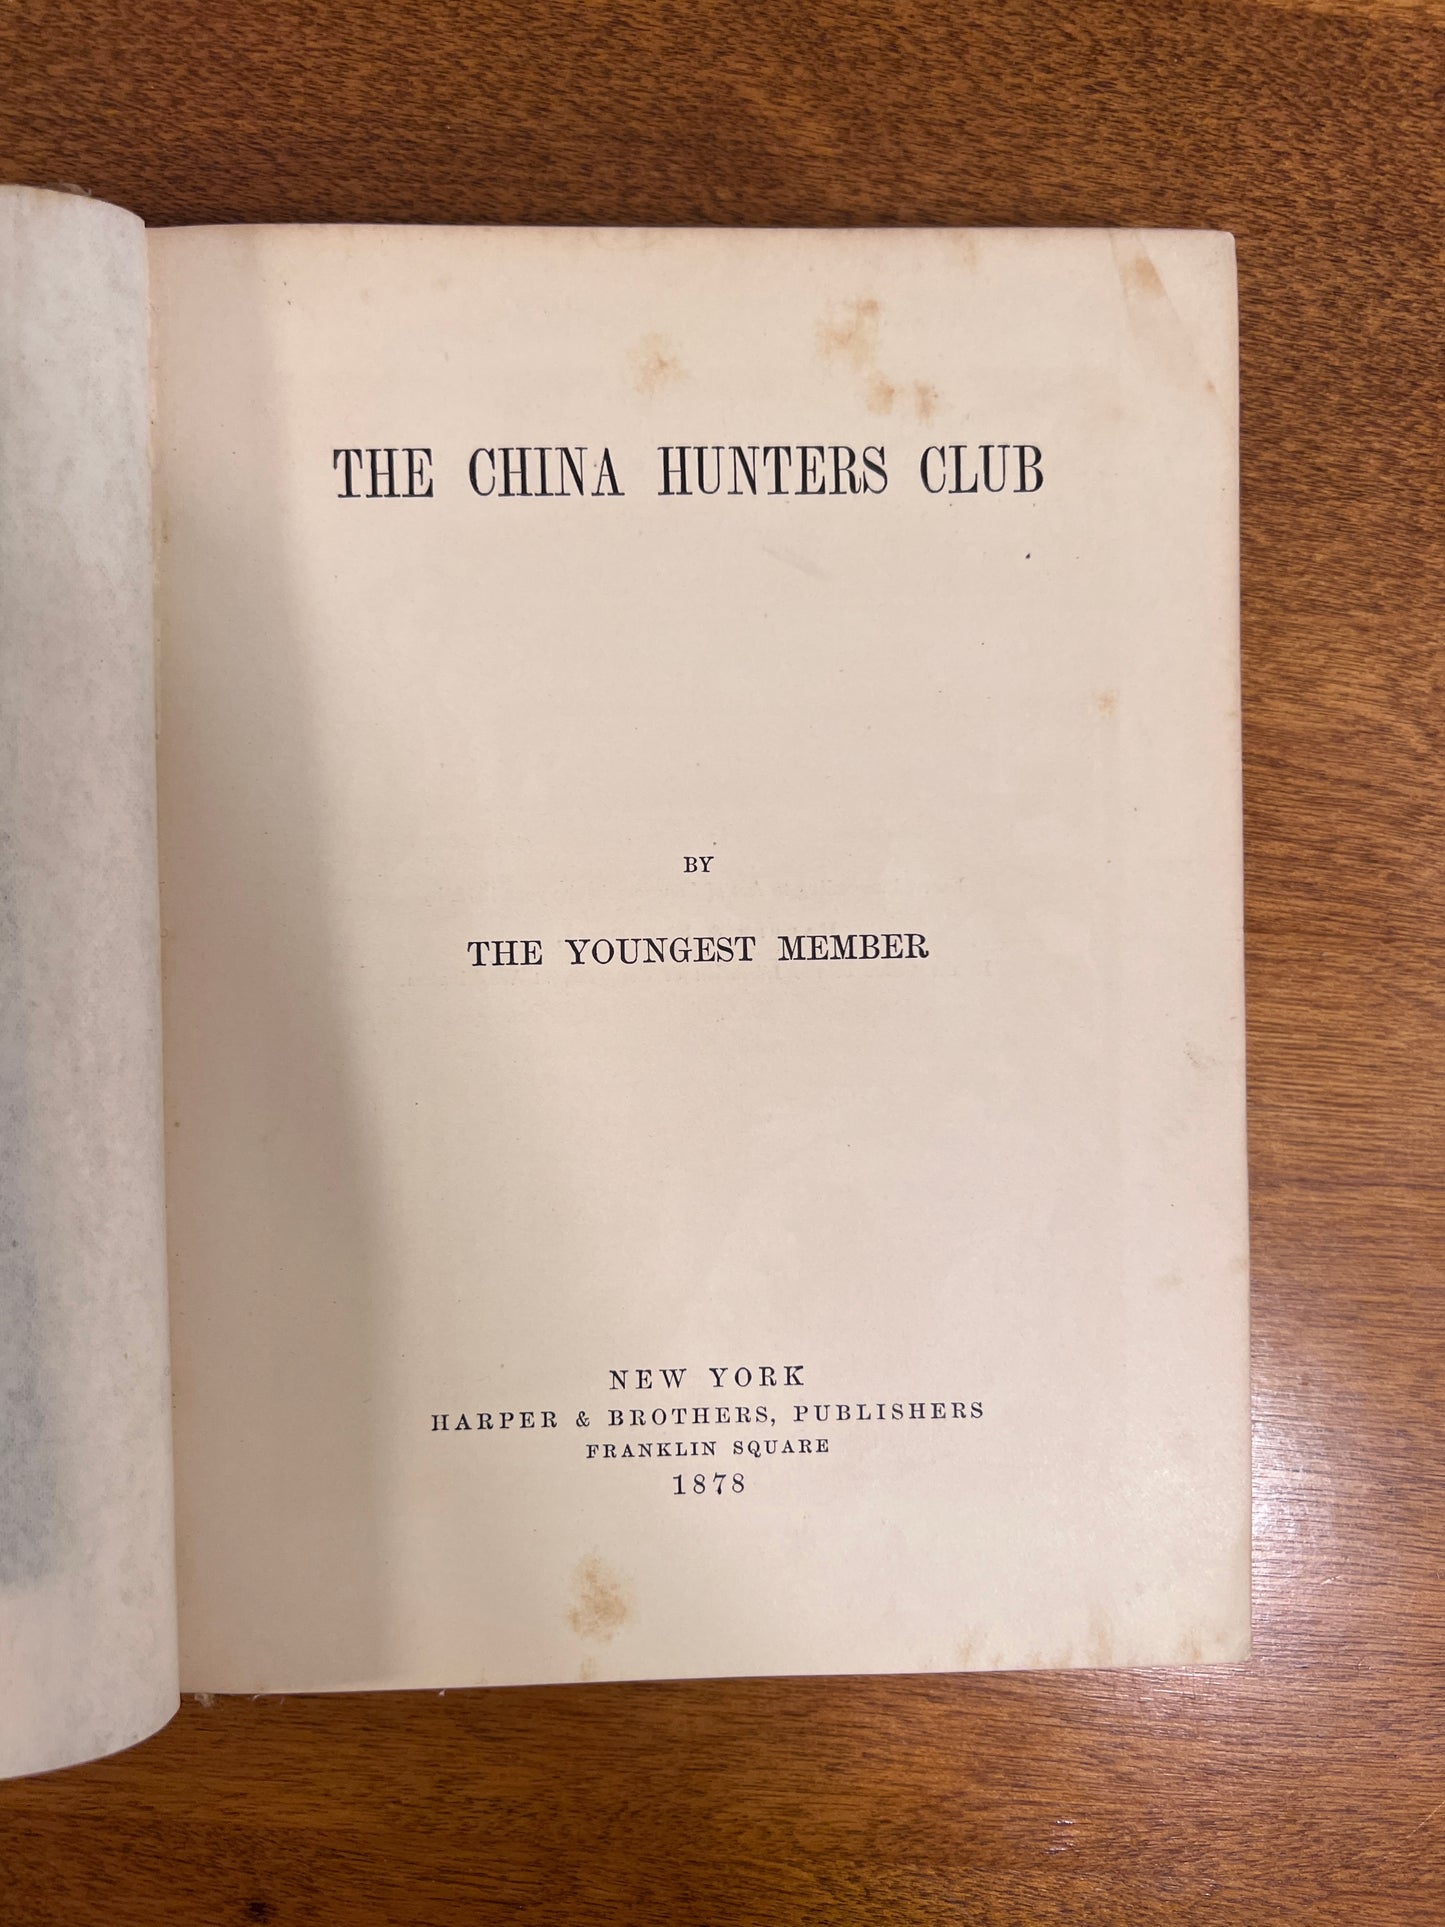 The China Hunters Club by The Youngest Member 1878